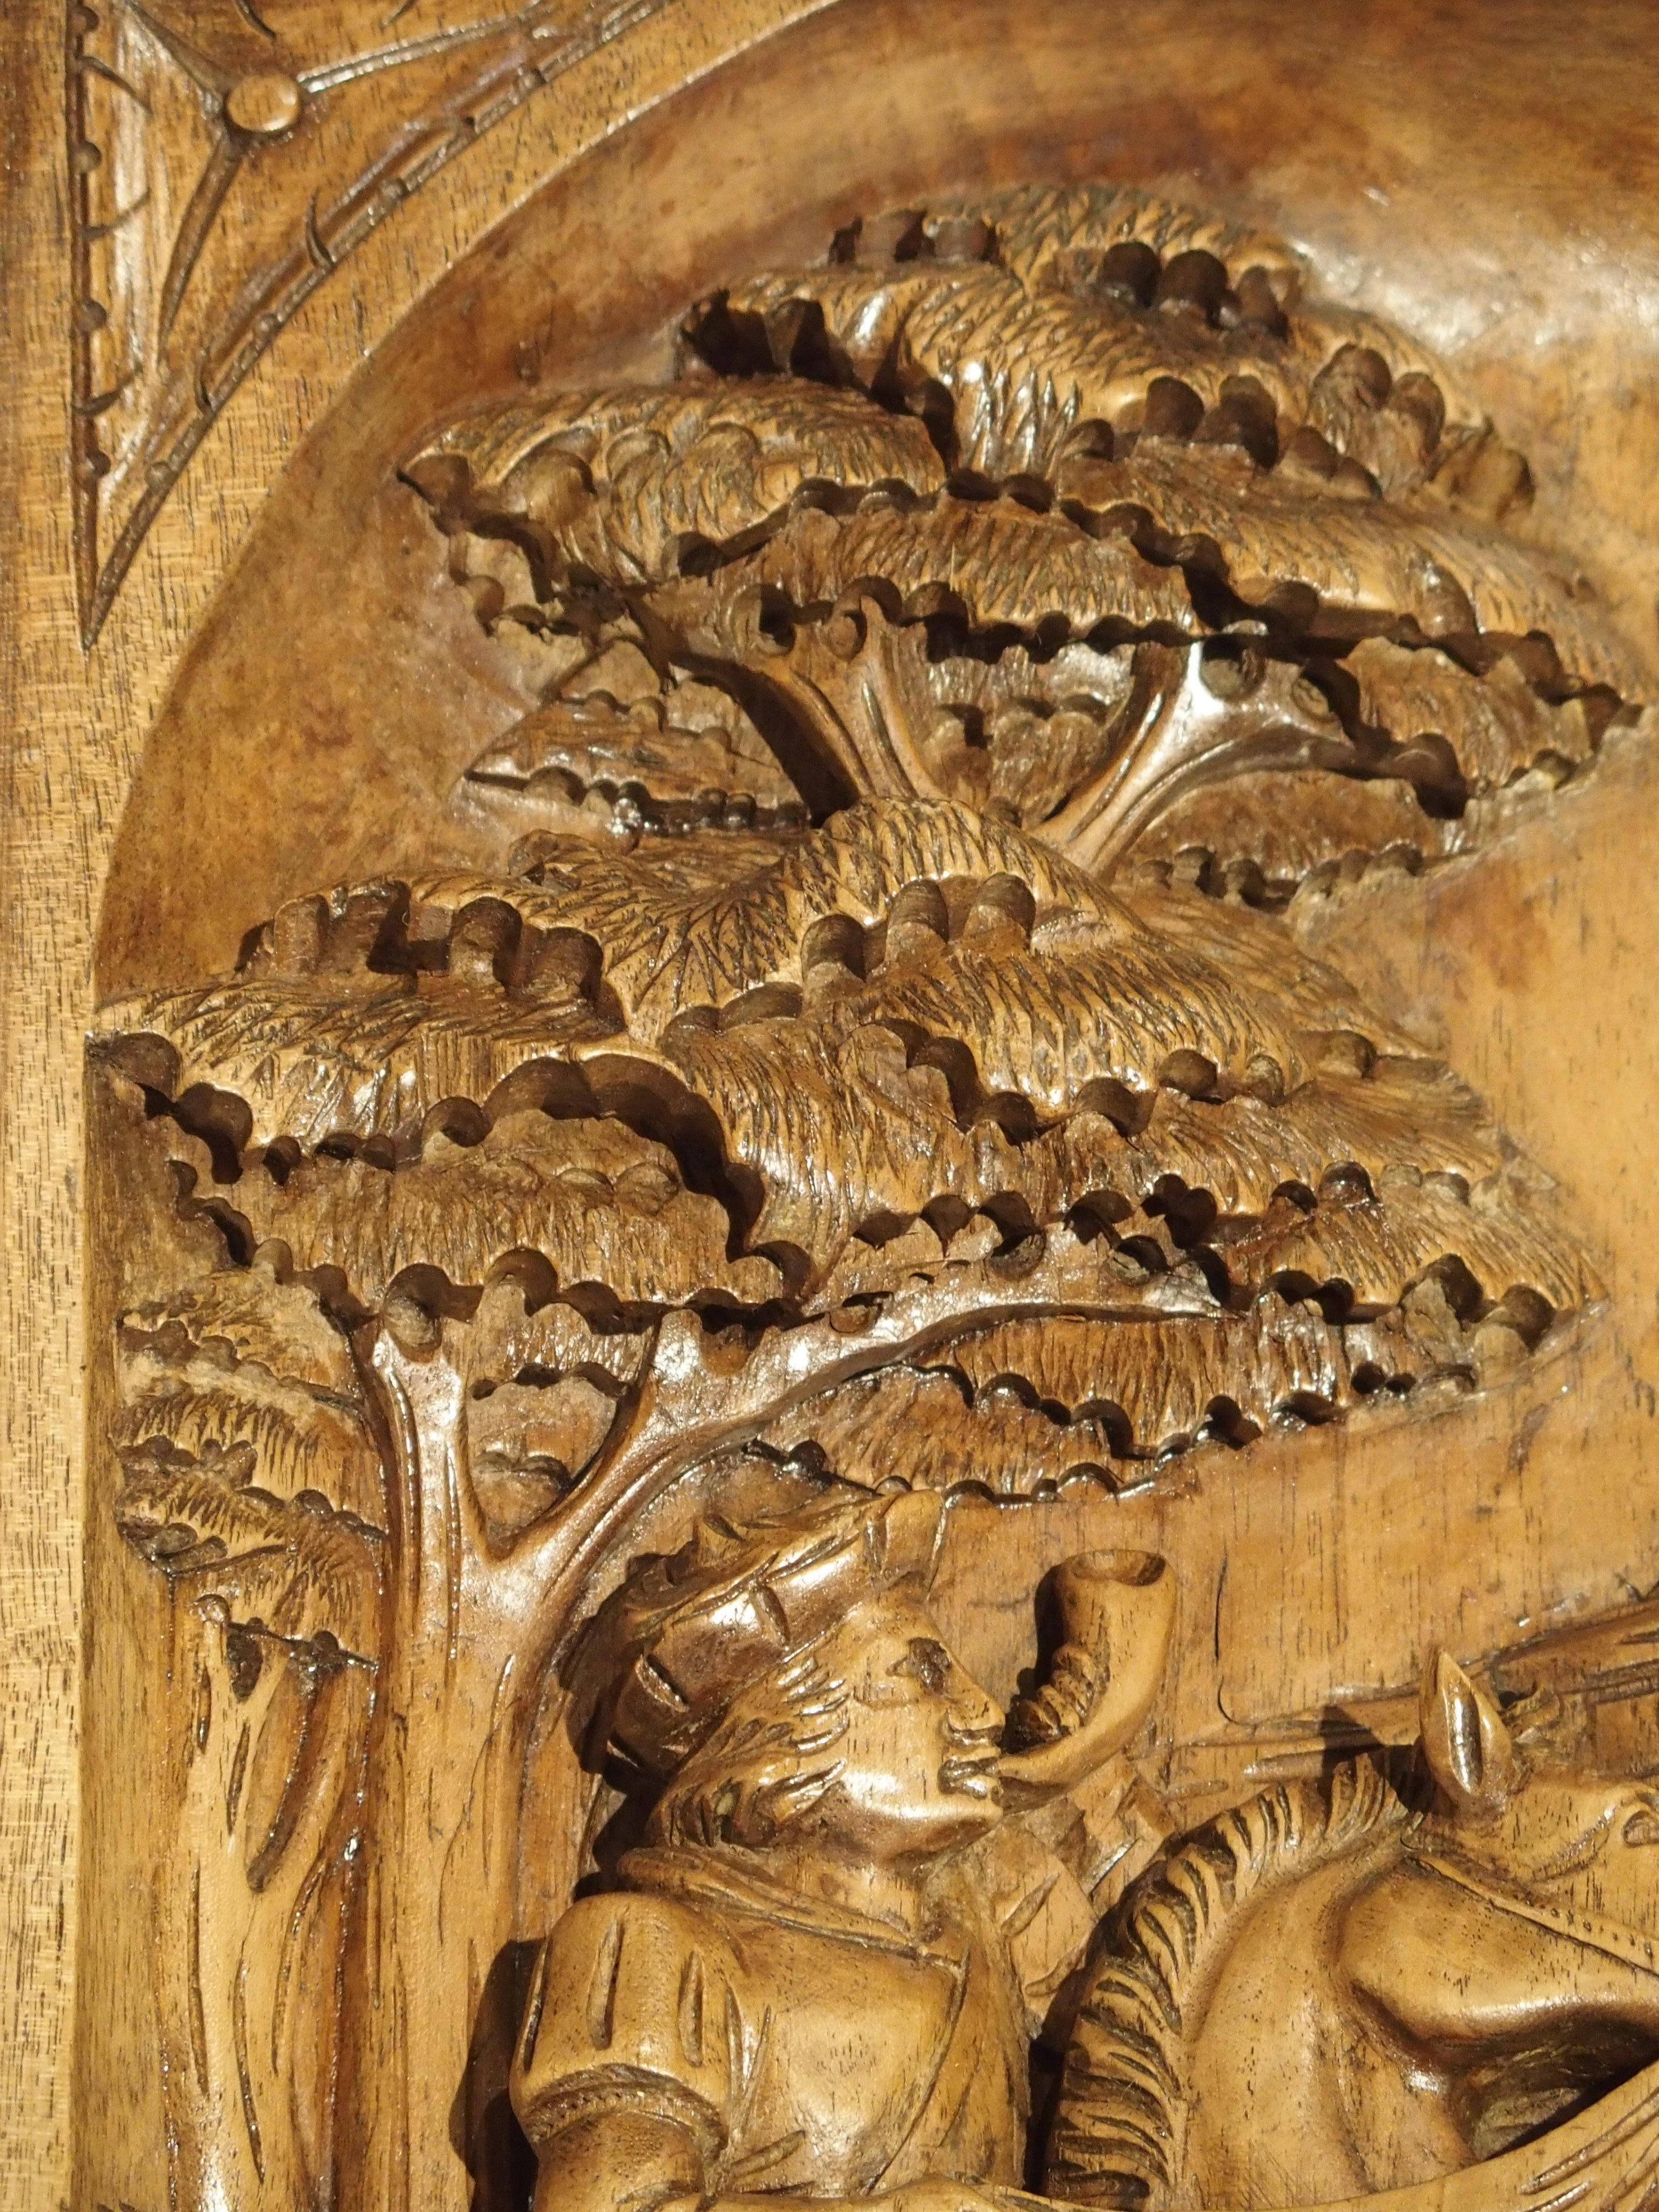 From France, this hand carved wooden plaque features deep and highly detailed carvings. It portrays a hunting scene with a man on a horse and a deer just below him. The man has a horn in his mouth, and his two hunting dogs are already engaged with